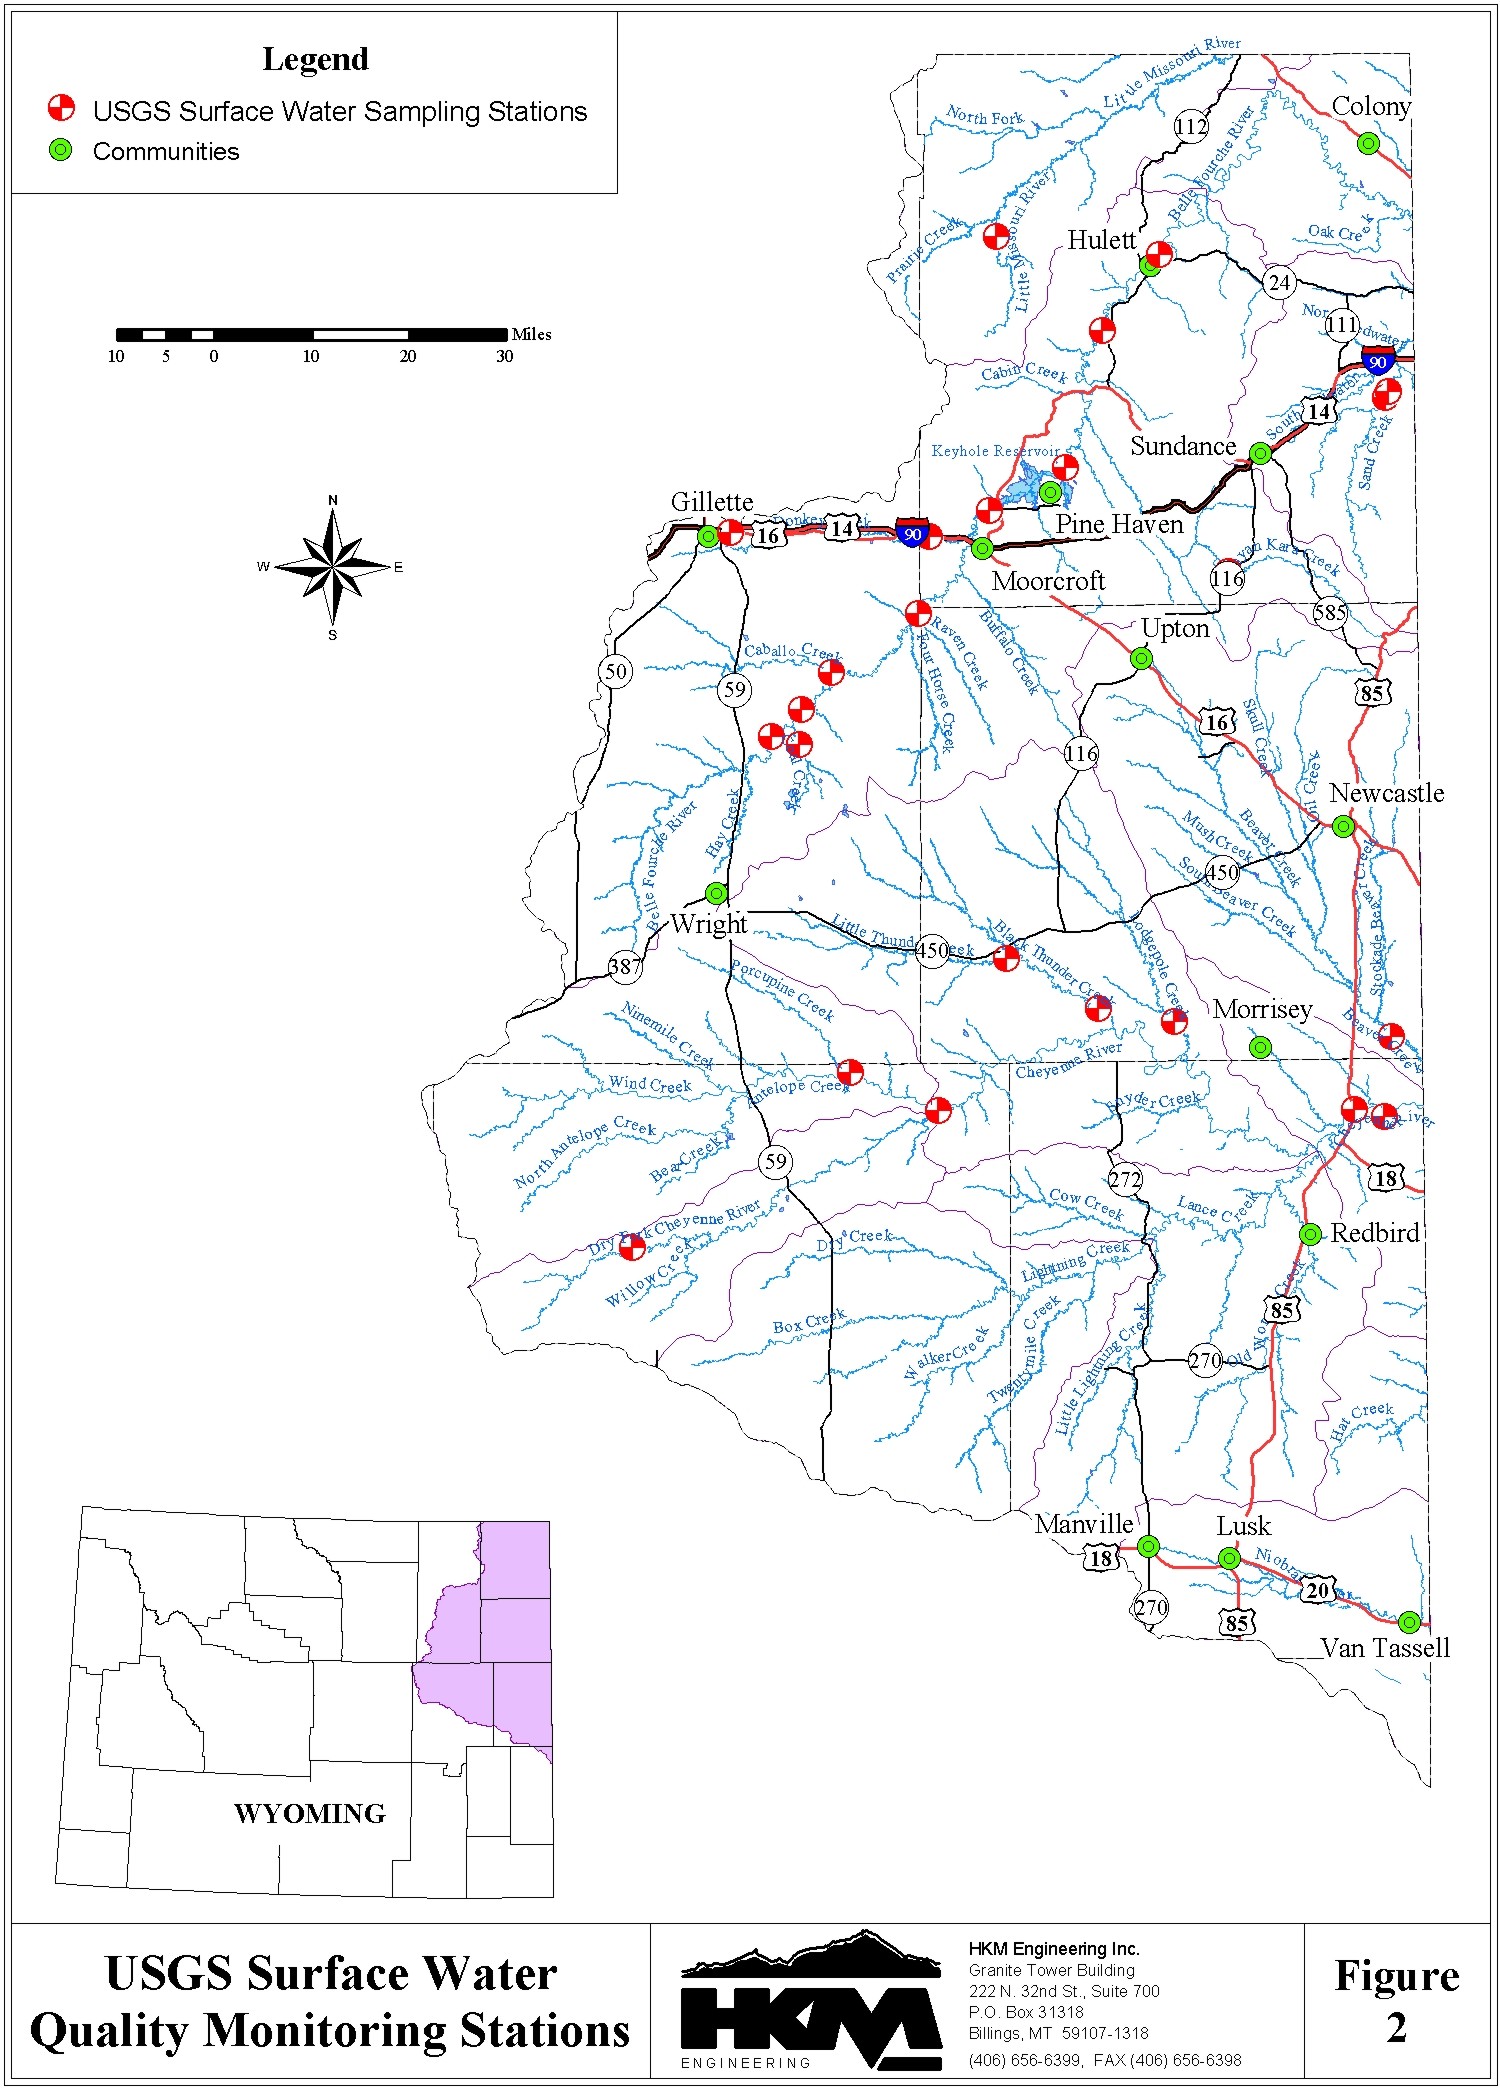 USGS Surface Water Quality Monitoring Stations, Northeast Wyoming River Basins